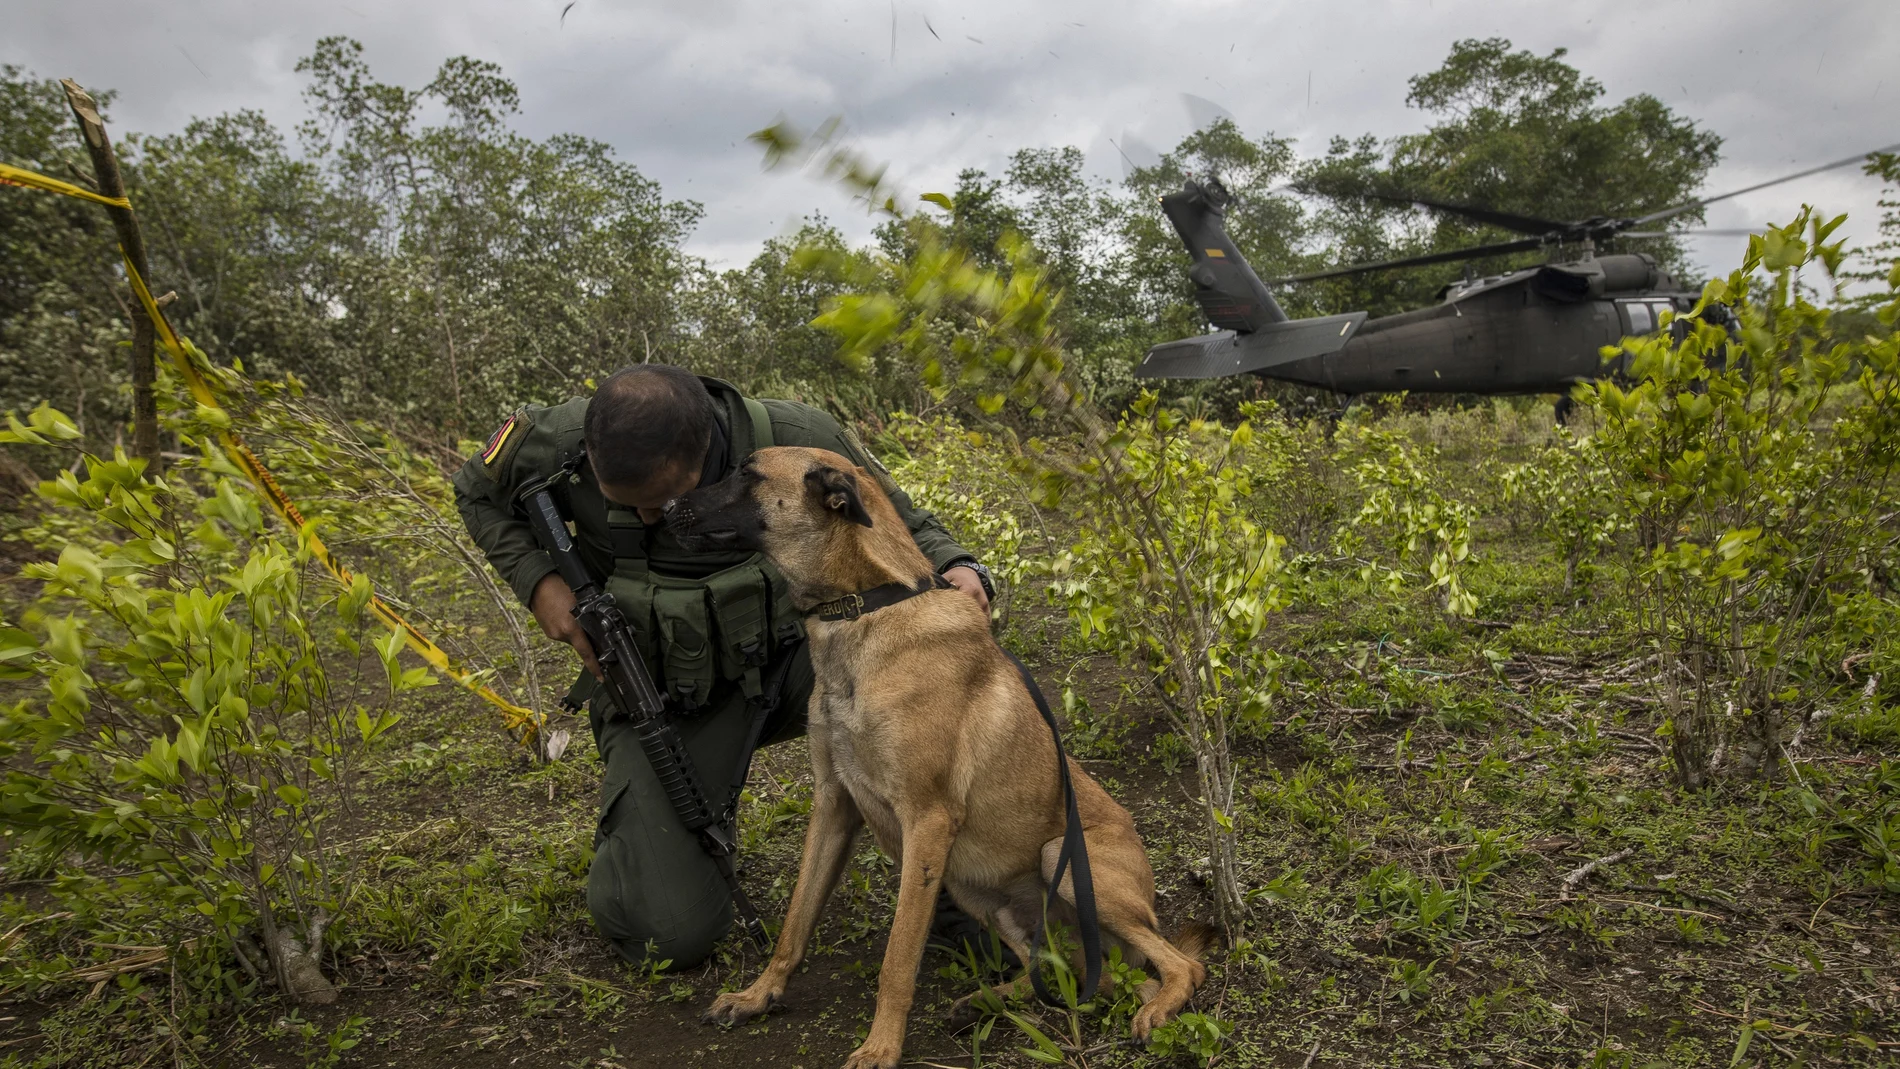 A counter-narcotics police officer and his dog takes cover while a helicopter takes off from a coca field during a manual eradication operation in Tumaco, southwestern Colombia, Wednesday, Dec. 30, 2020. (AP Photo/Ivan Valencia)